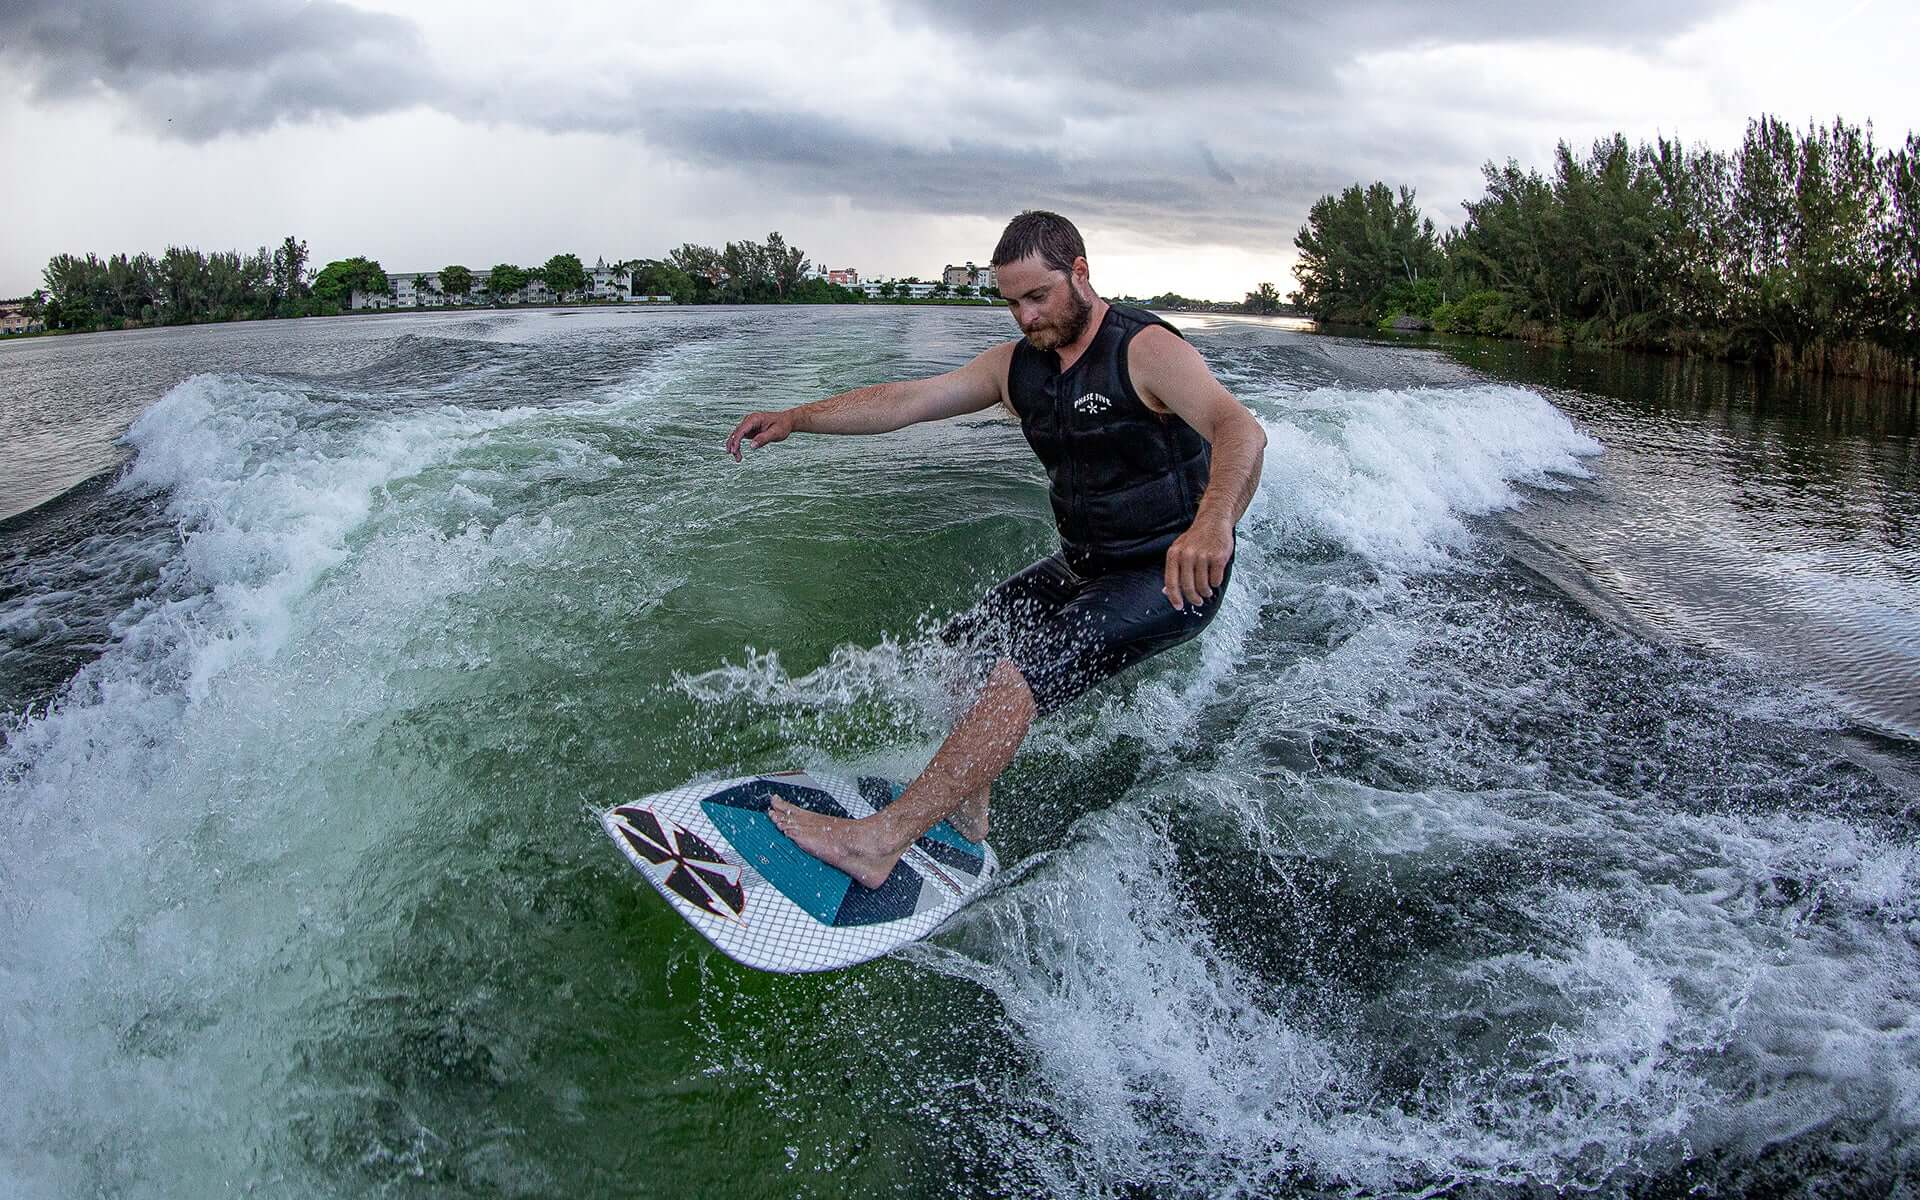 An experienced rider demonstrating stability and board control while riding a wave on a Phase 5 2024 Doctor Wakesurf Board.